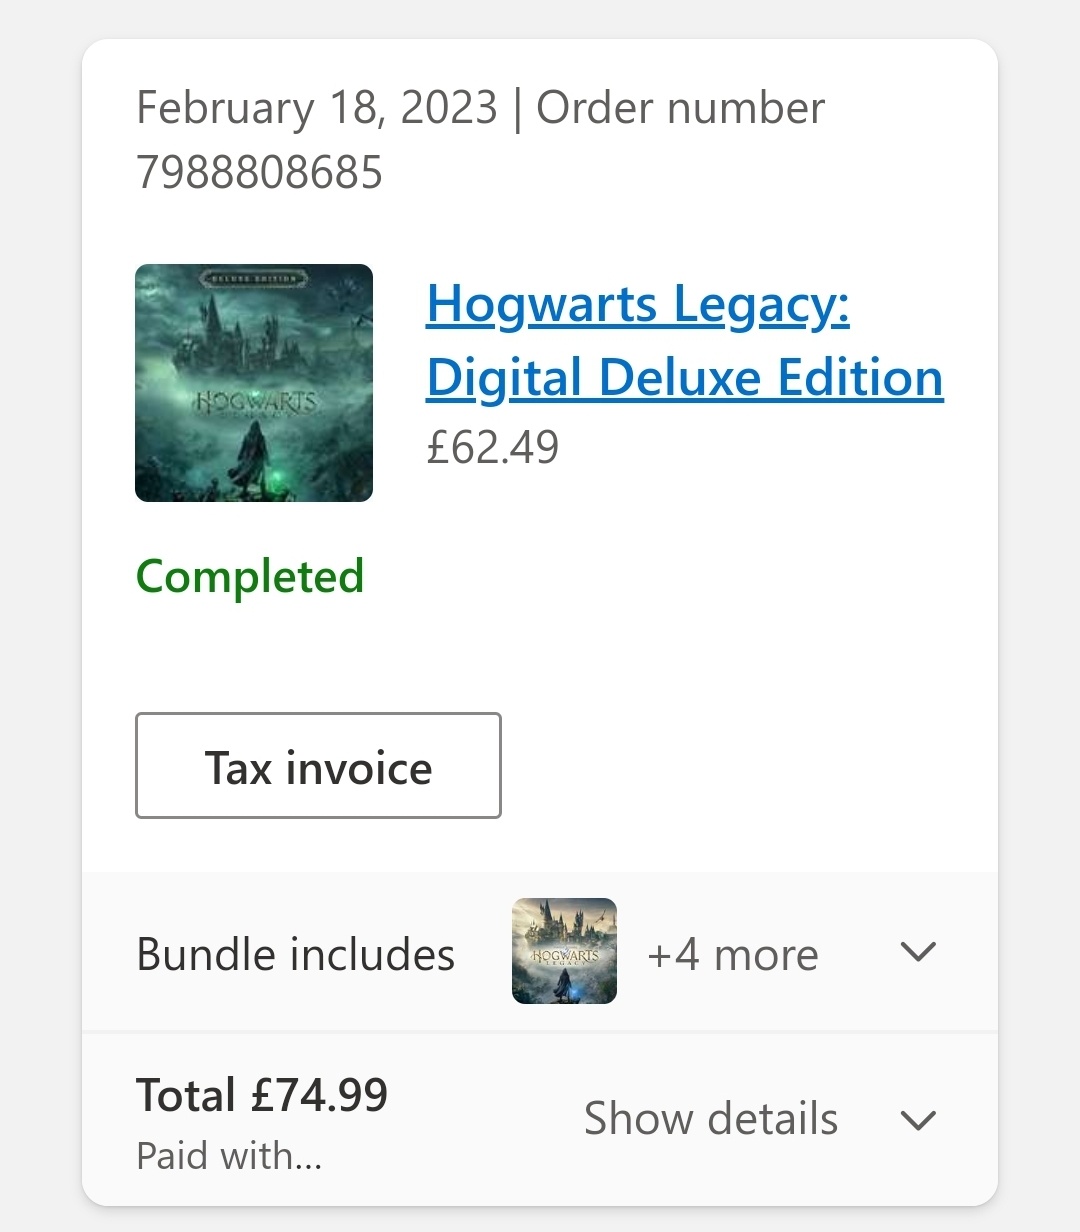 Hogwarts Legacy [Deluxe Edition] for Xbox One